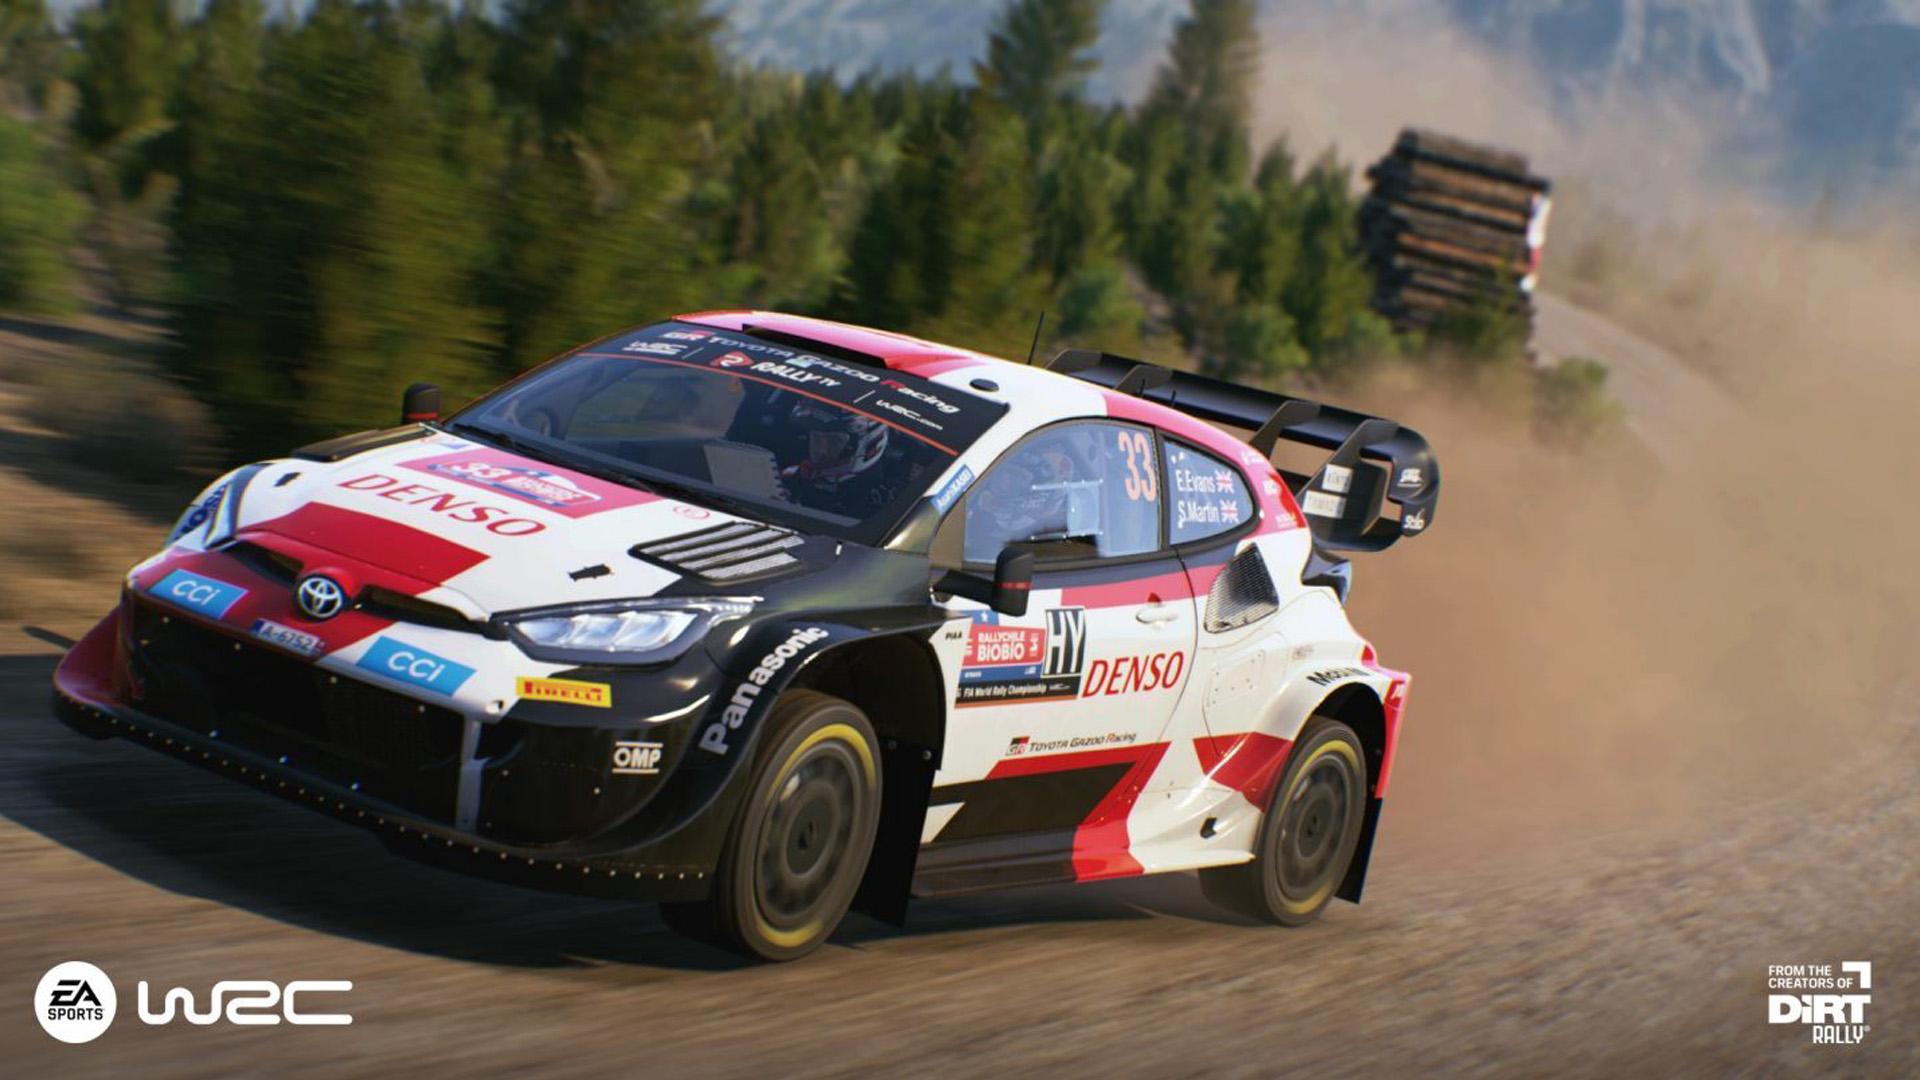 DIRT Rally 2.0 Day One Edition - Xbox One, Xbox One